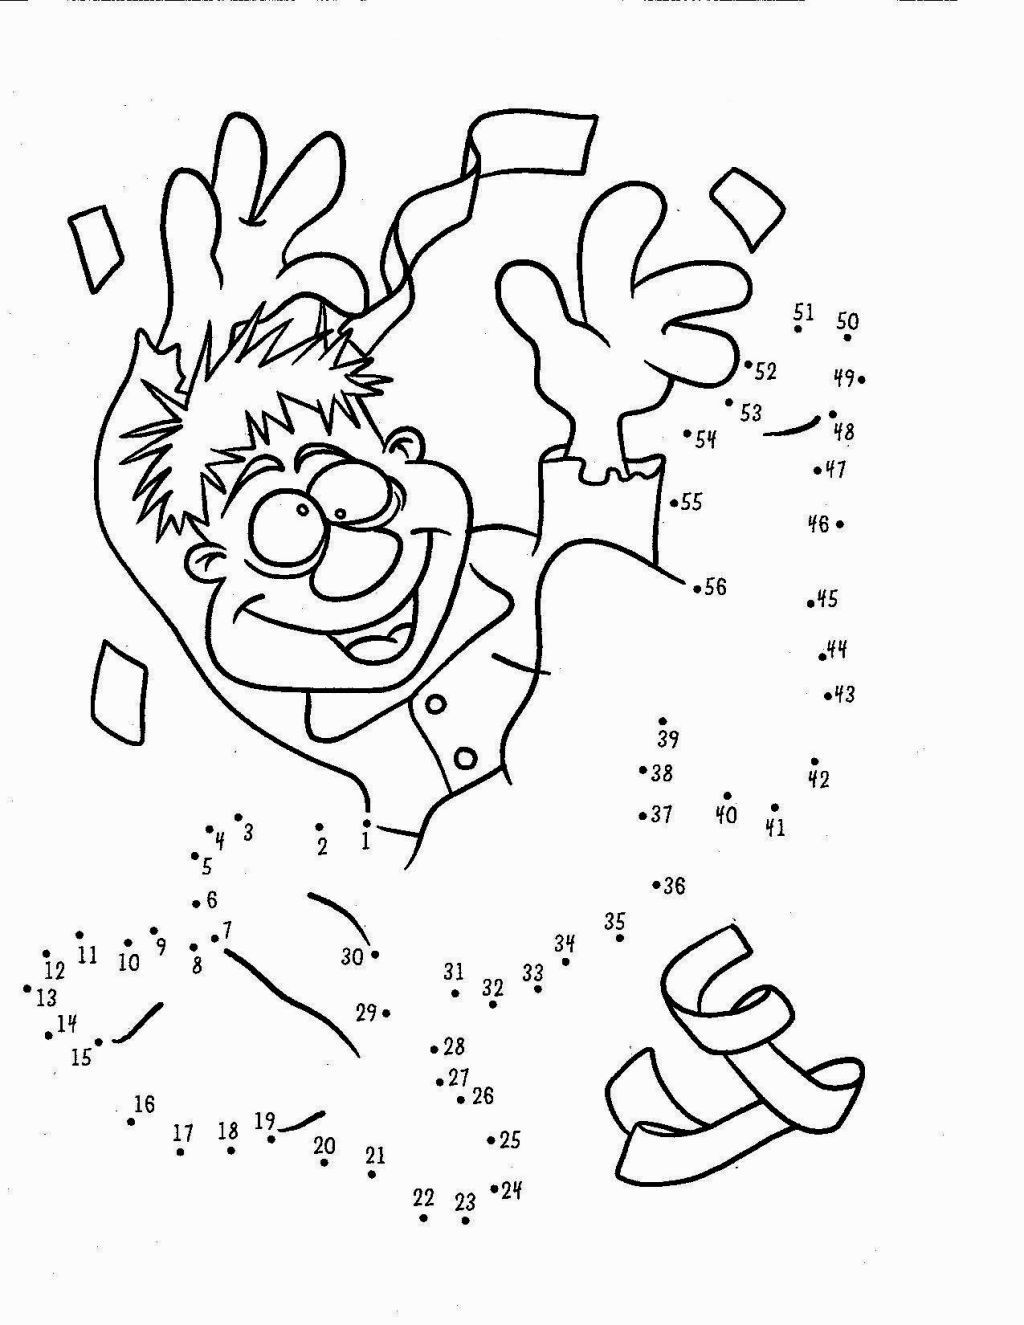 Where The Wild Things Are Coloring Pages | Coloring Pages